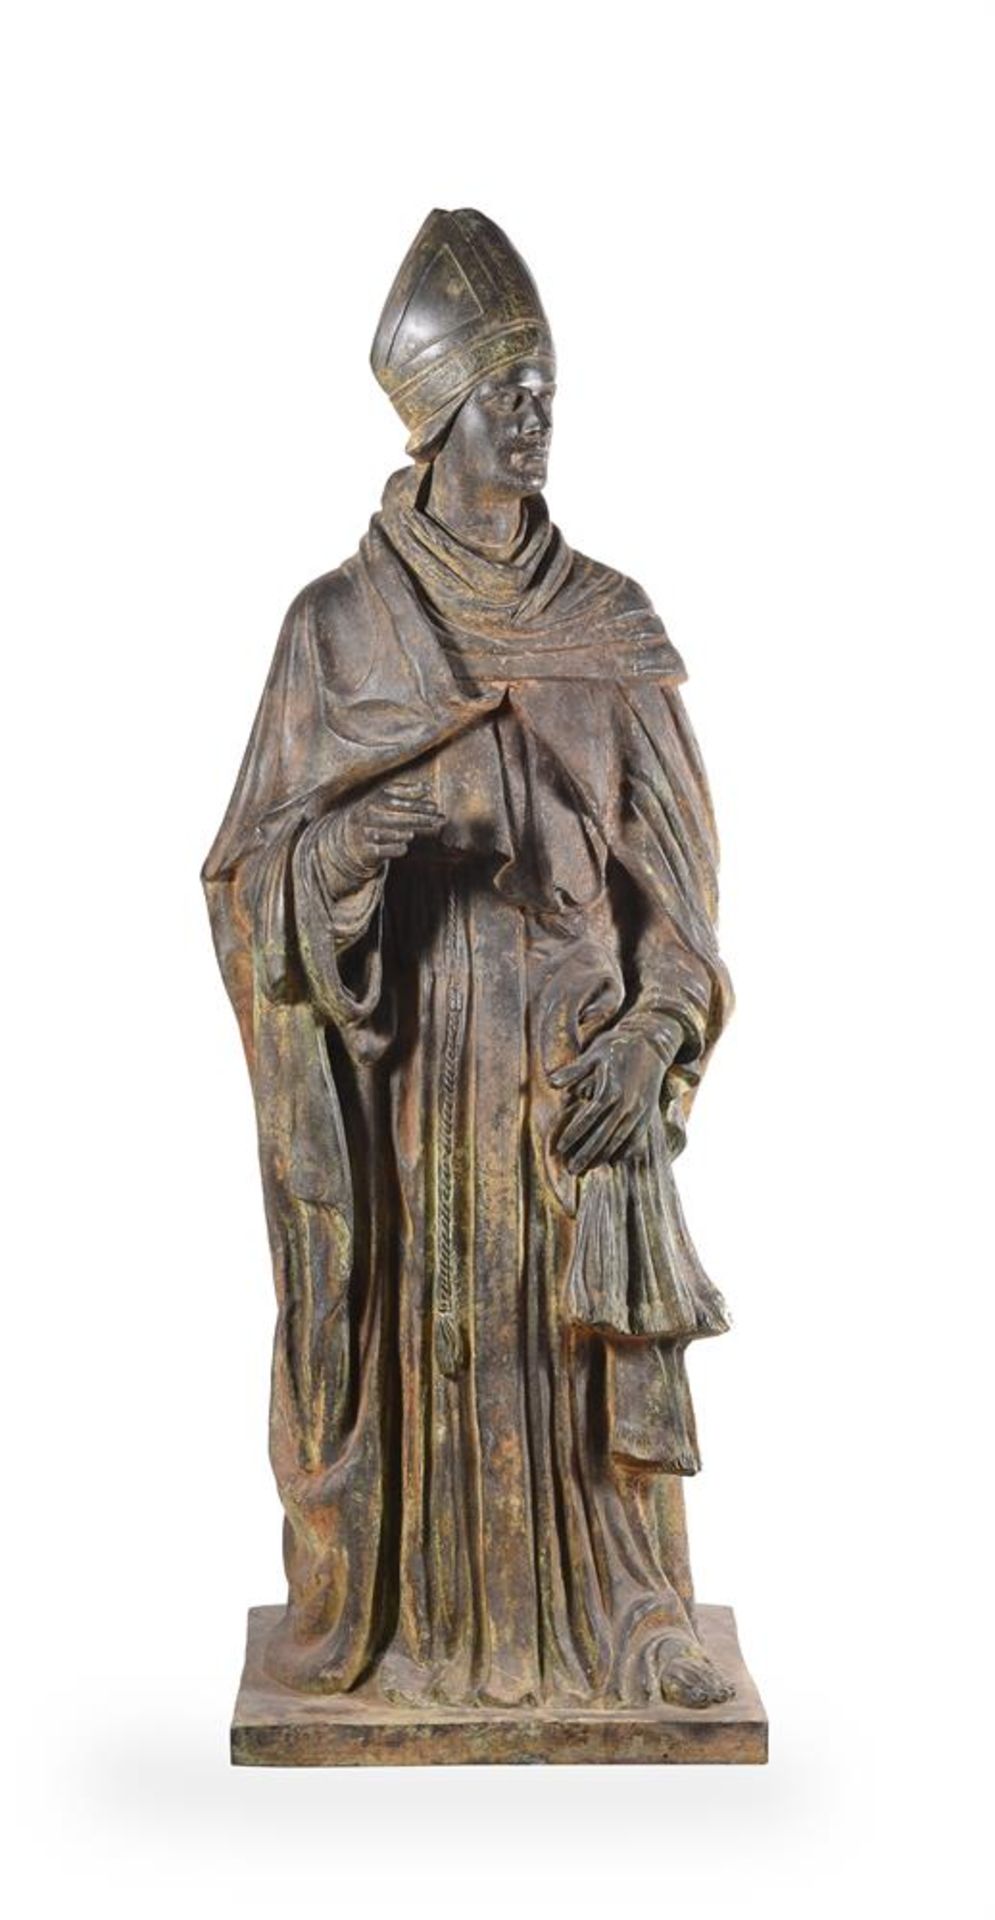 A LIFE SIZE BRONZE FIGURE OF A BISHOP, PROBABLY MID-19TH CENTURY - Image 4 of 4